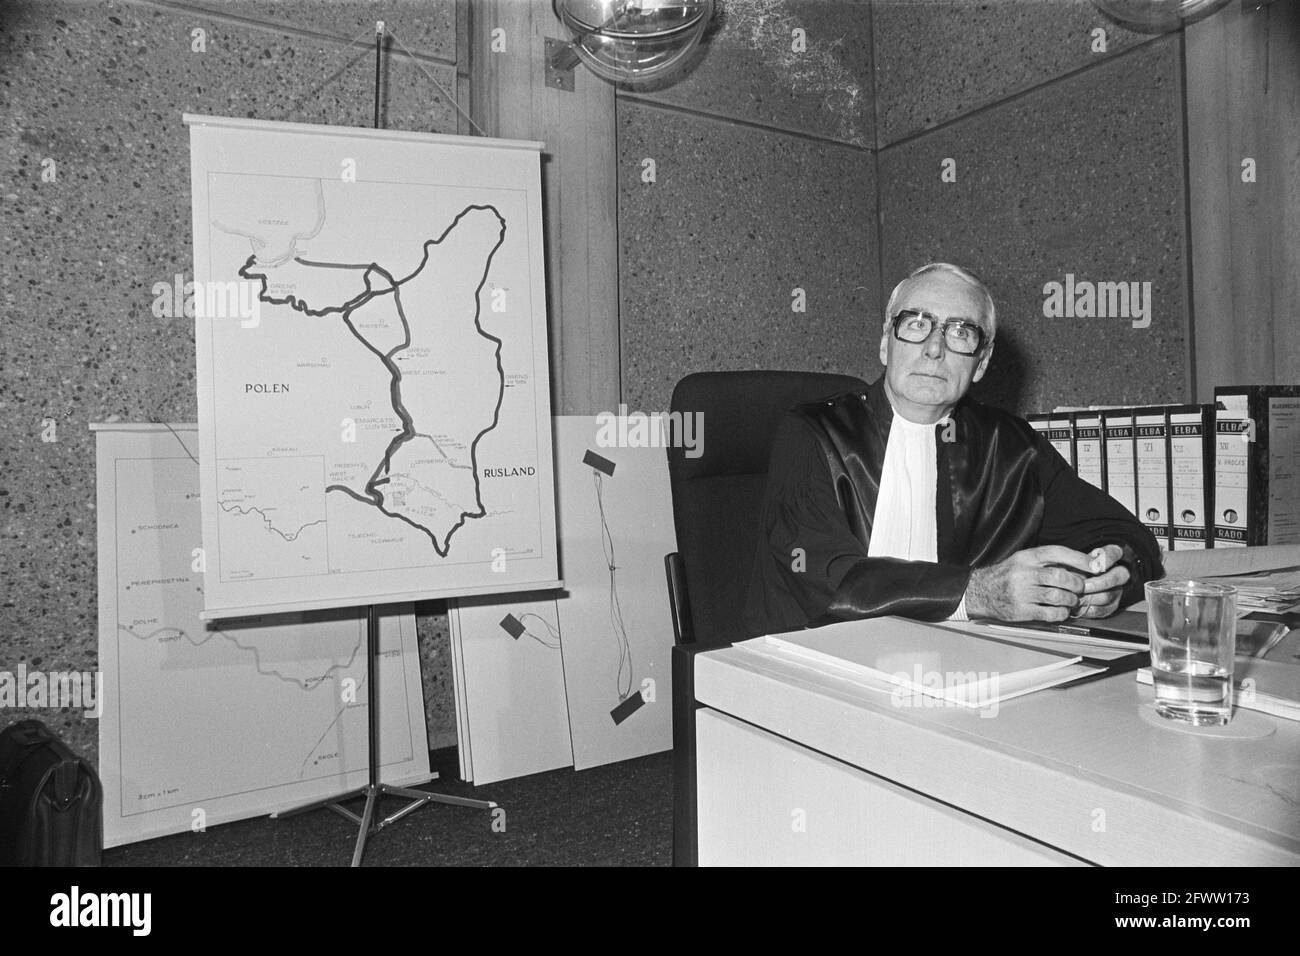 Trial against Menten started in Amsterdam; Public Prosecutor, Habermehl with map of area where Menten operated, 9 May 1977, war criminals, trials, The Netherlands, 20th century press agency photo, news to remember, documentary, historic photography 1945-1990, visual stories, human history of the Twentieth Century, capturing moments in time Stock Photo